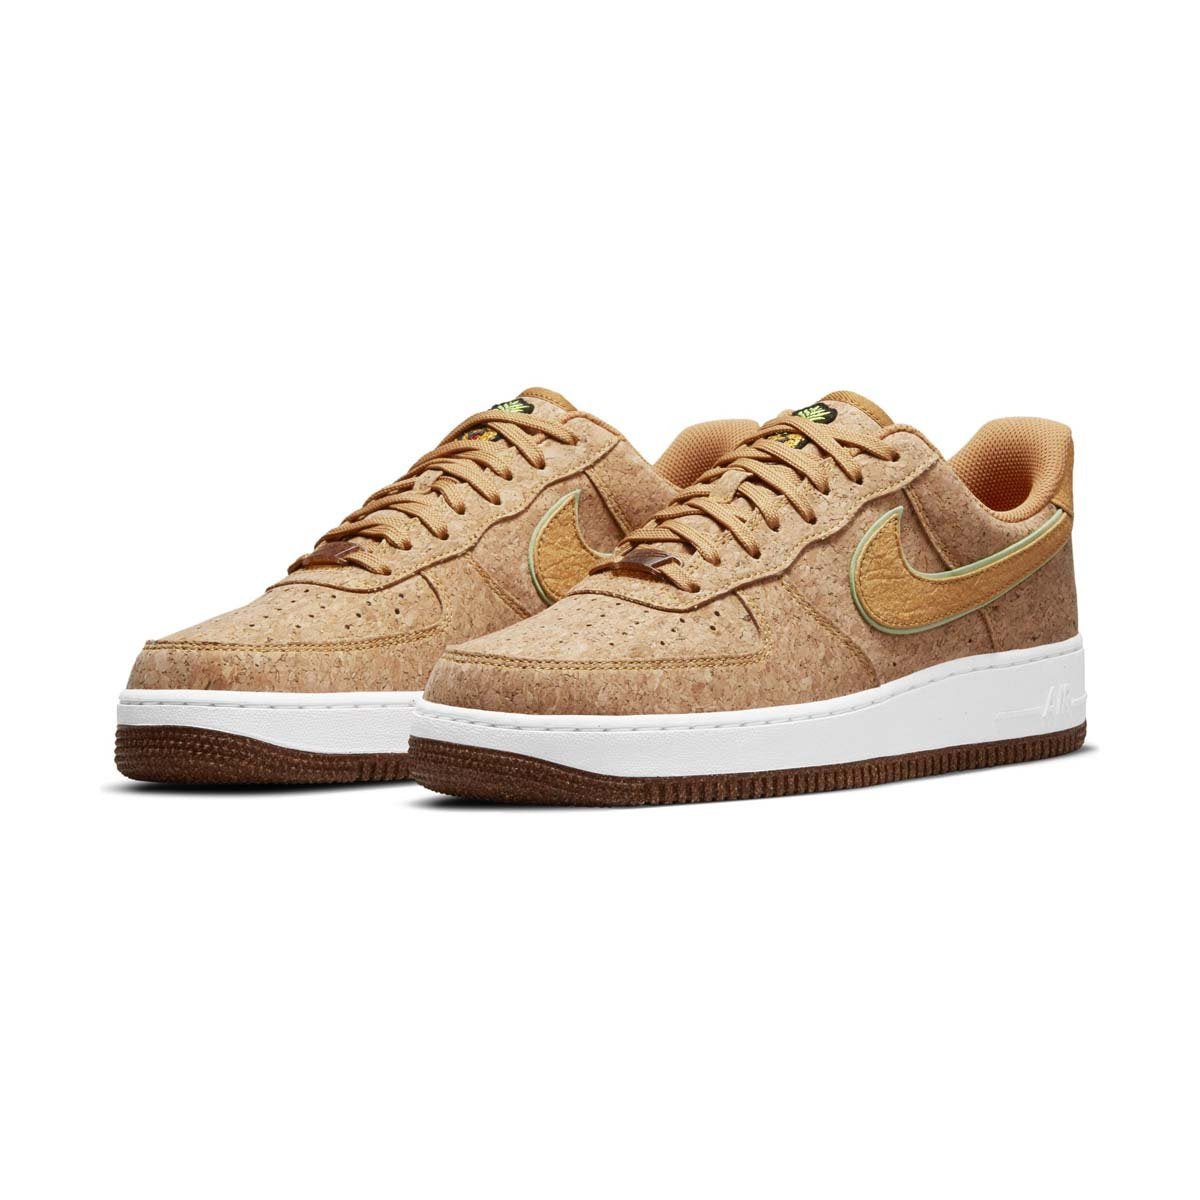 Size 12 Nike Air Force 1 '07 LV8 Gold Foil Swoosh White/Gold